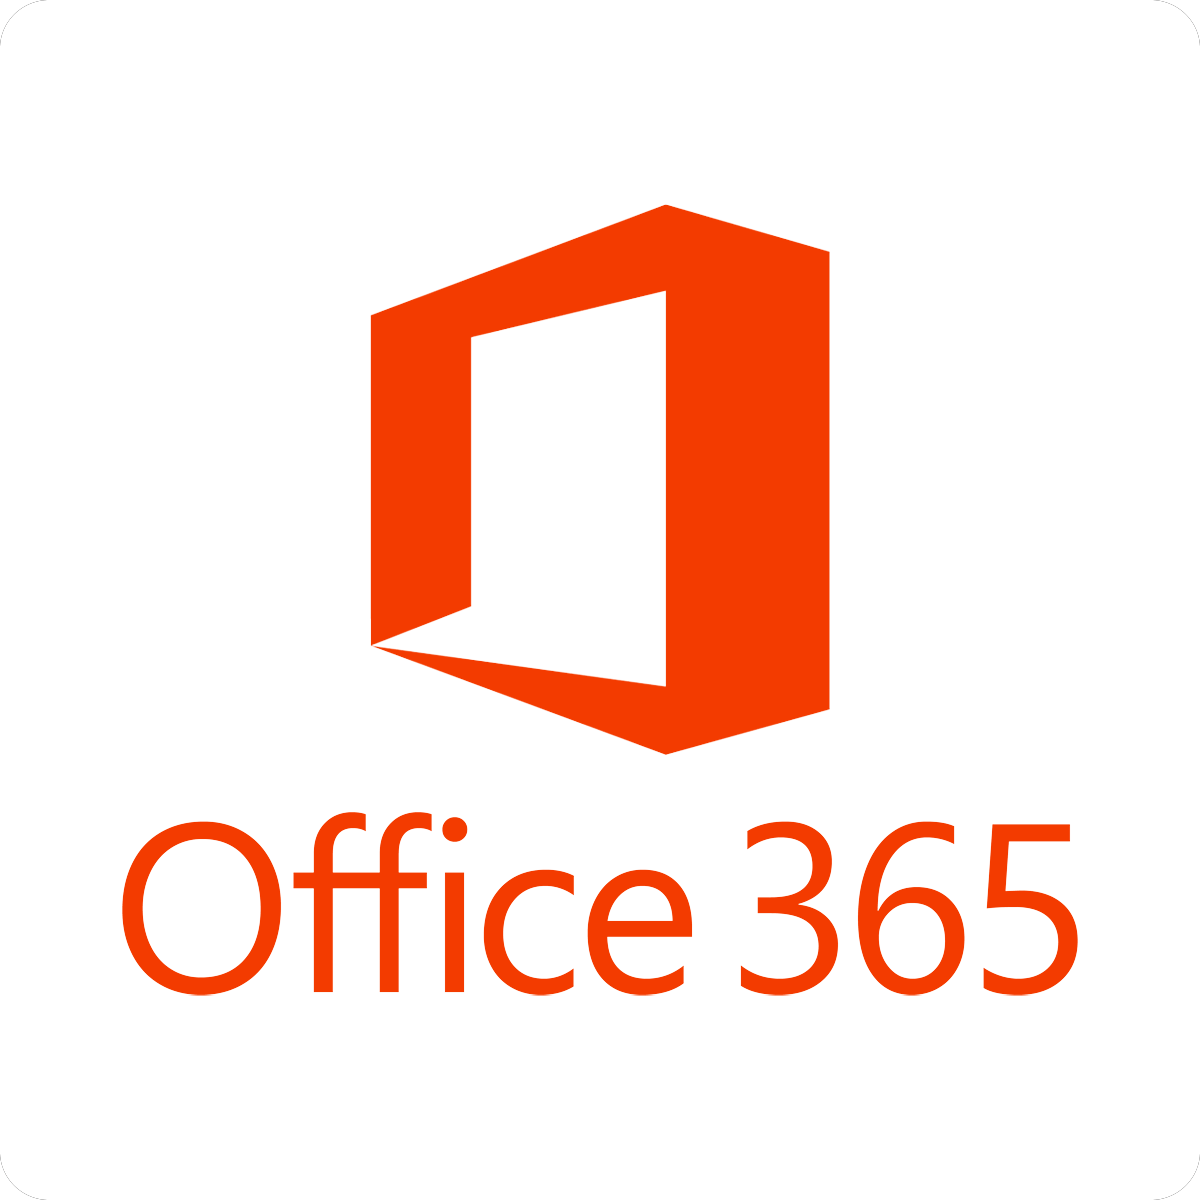 Office 365 - Excel not enough disk space